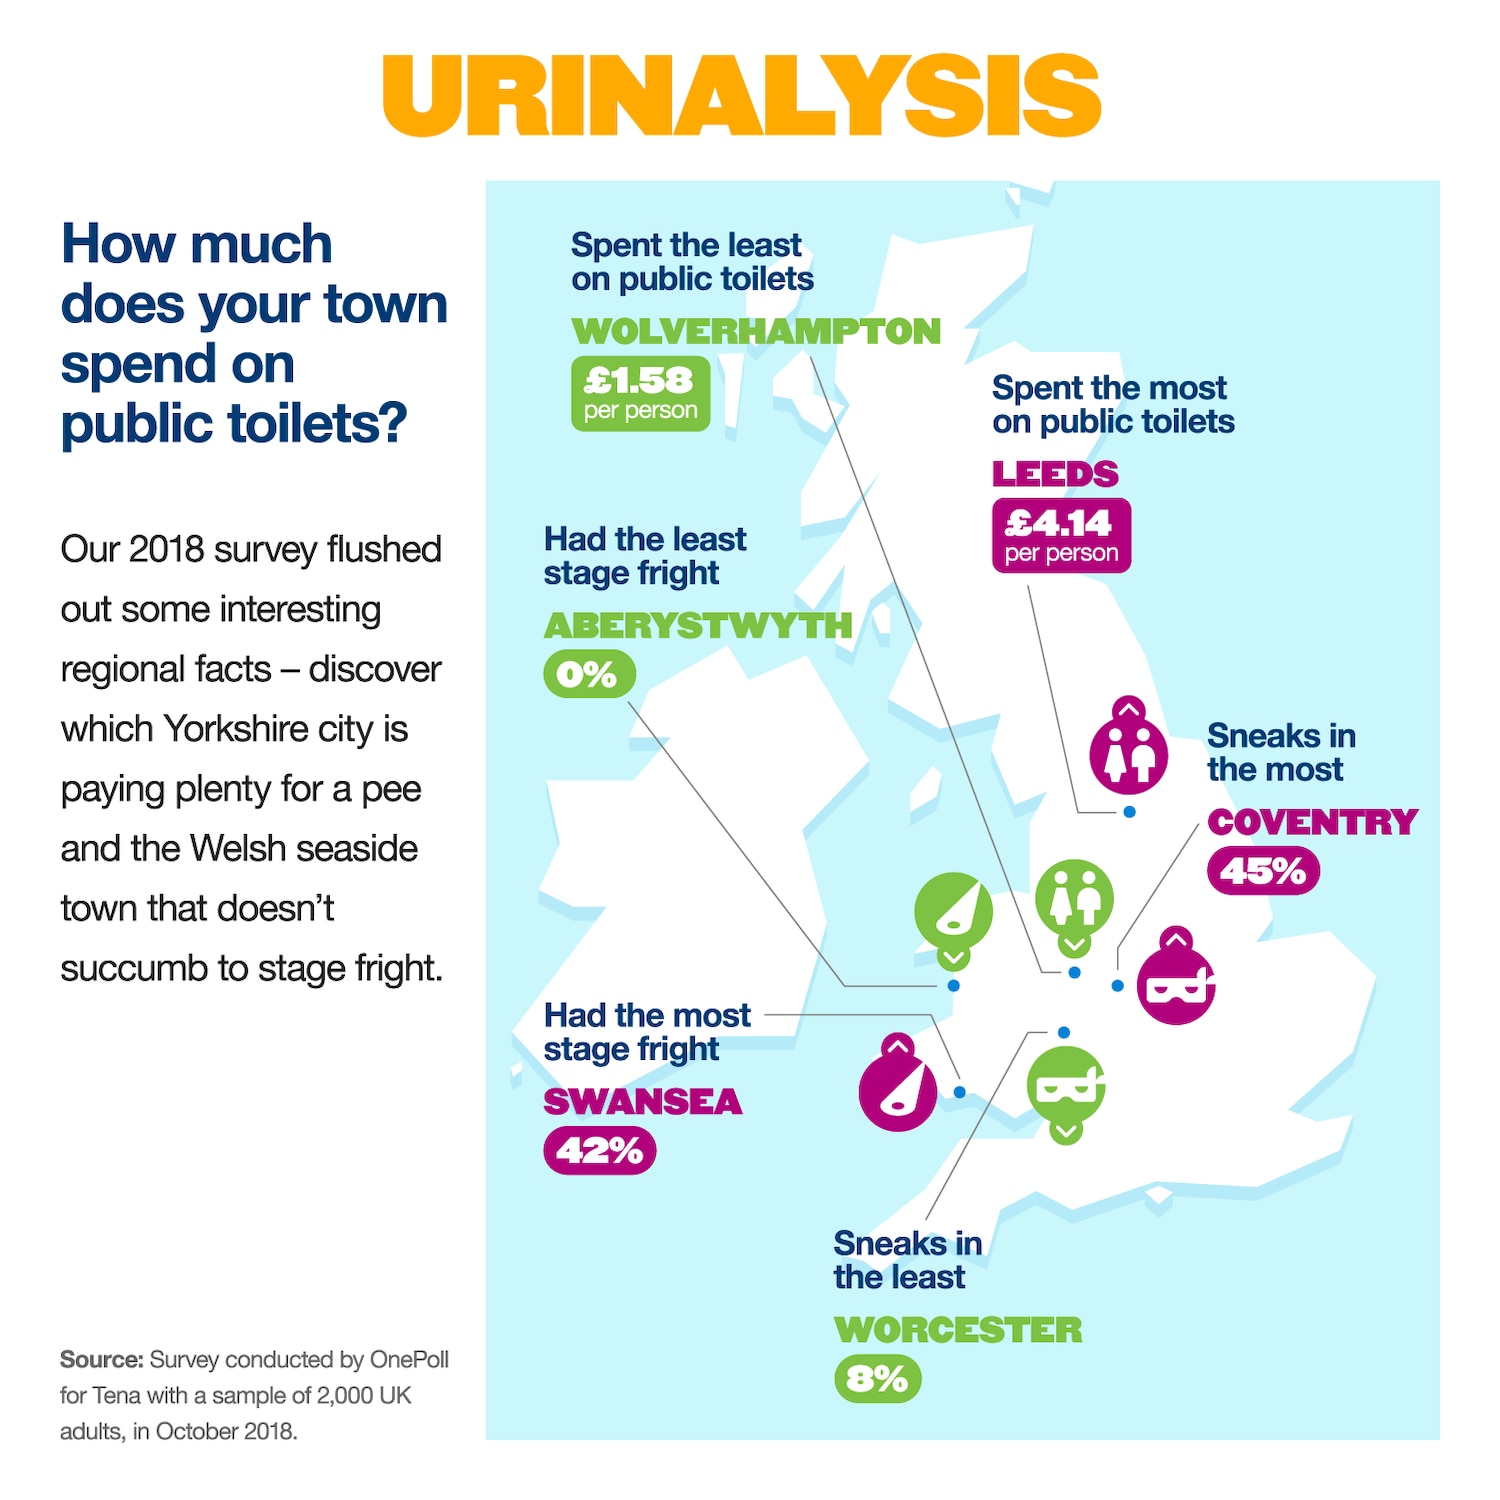 Urinalysis - how much does your town spend on public toilets? Our 2018 survey flushed out some interesting regional facts - discover which Yorkshire city is paying plenty for a pee and the Welsh seaside town that doesn't succumb to stage fright.